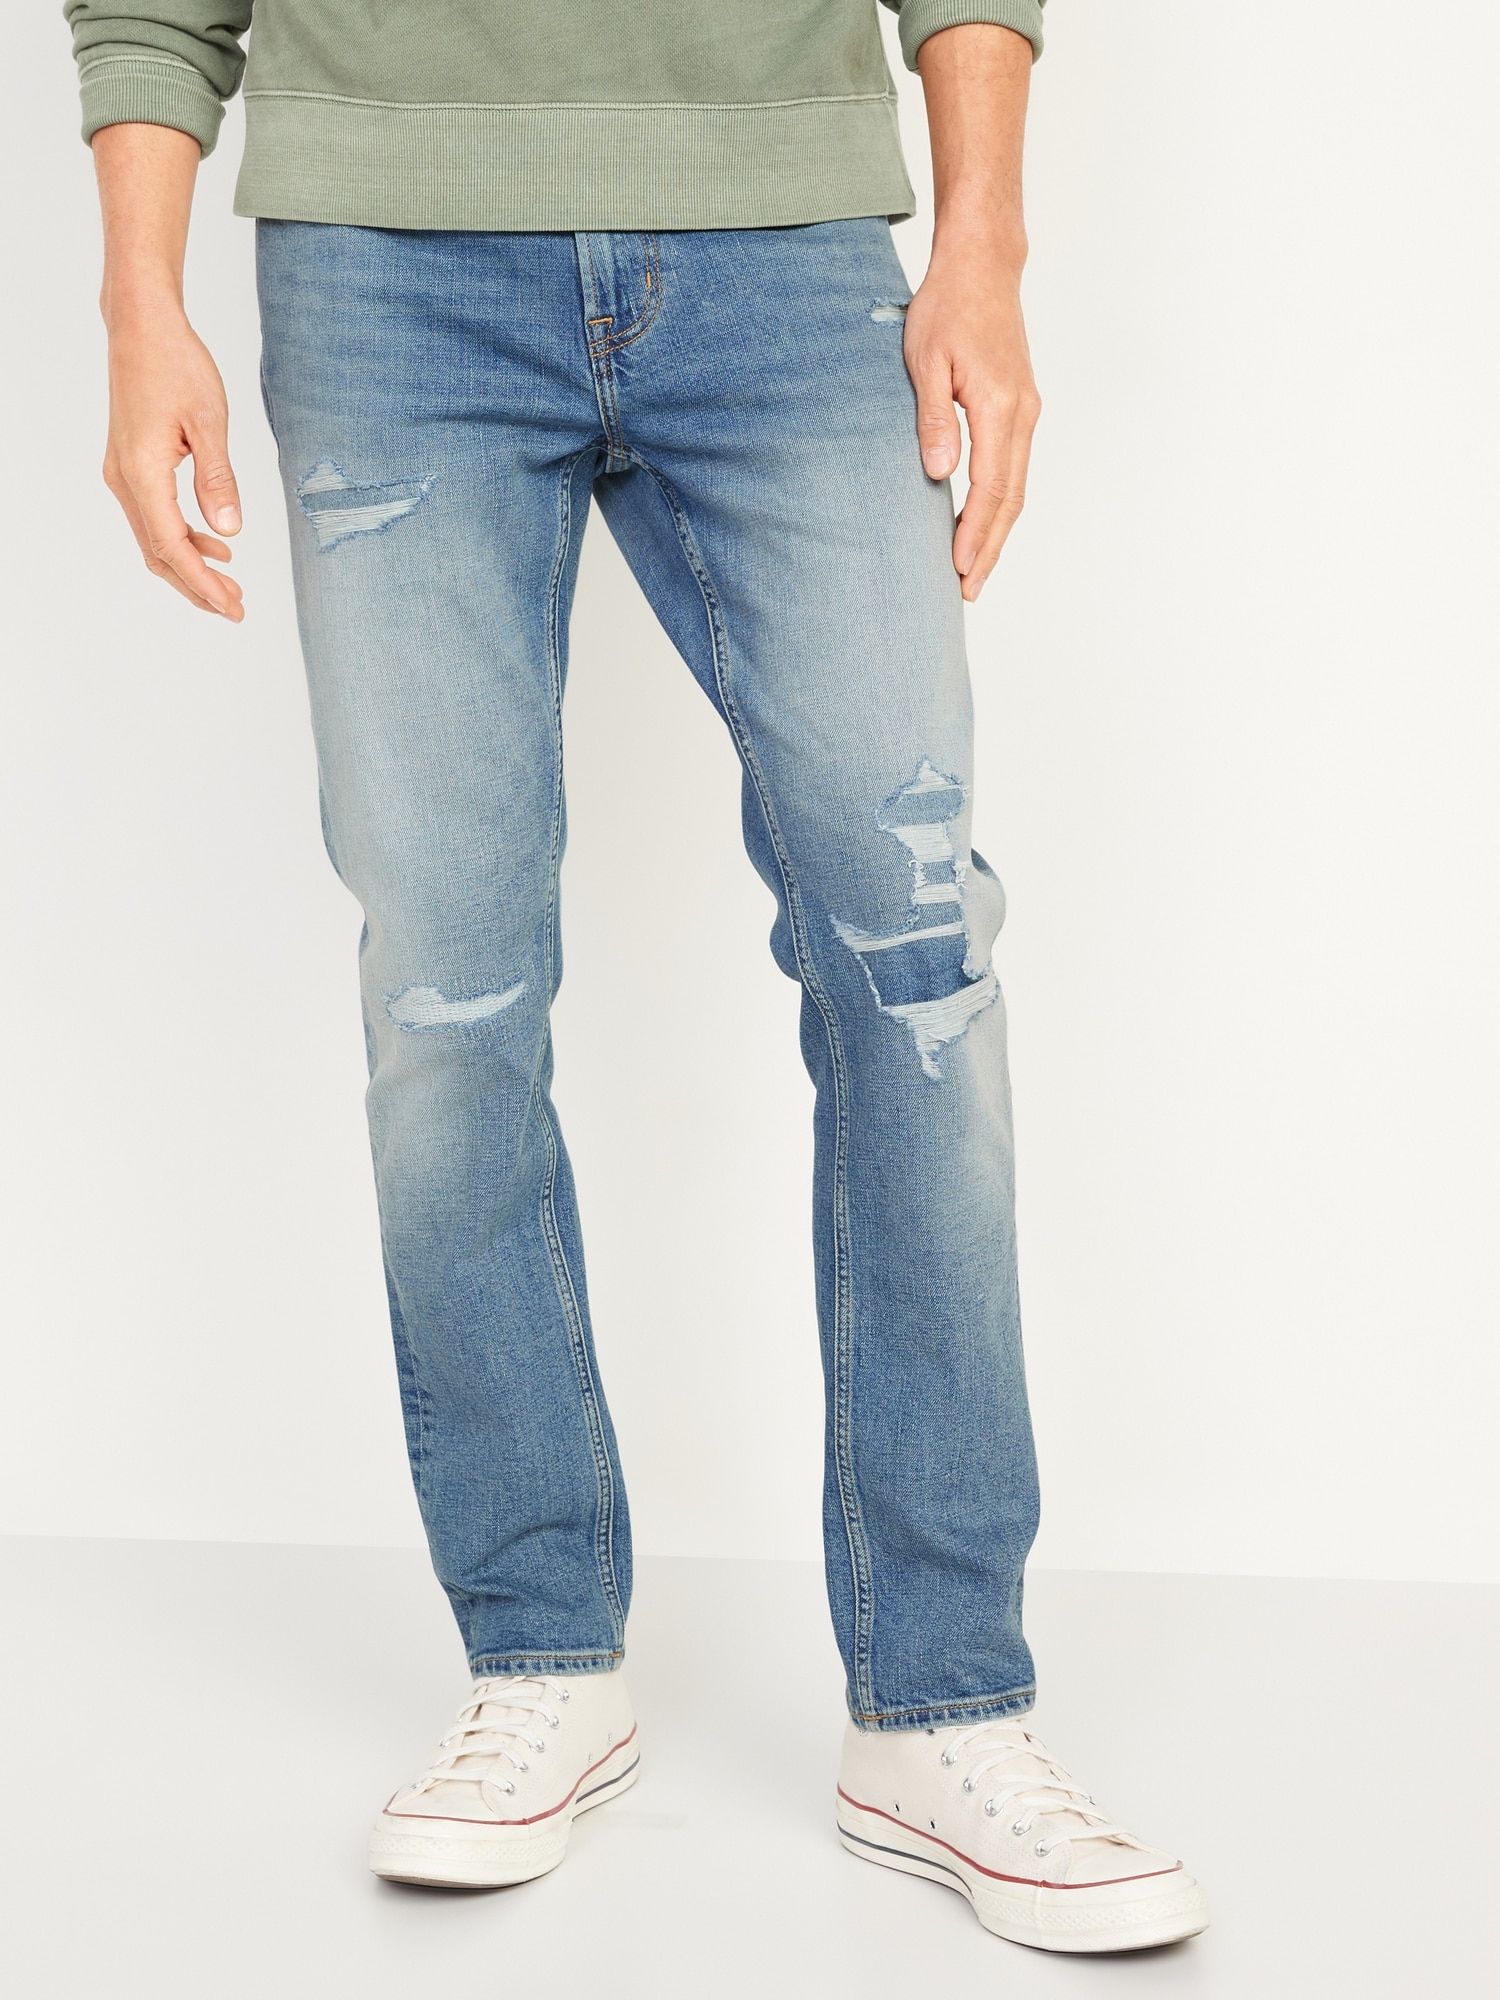 Men Playing Card Patched Ripped Frayed Jeans